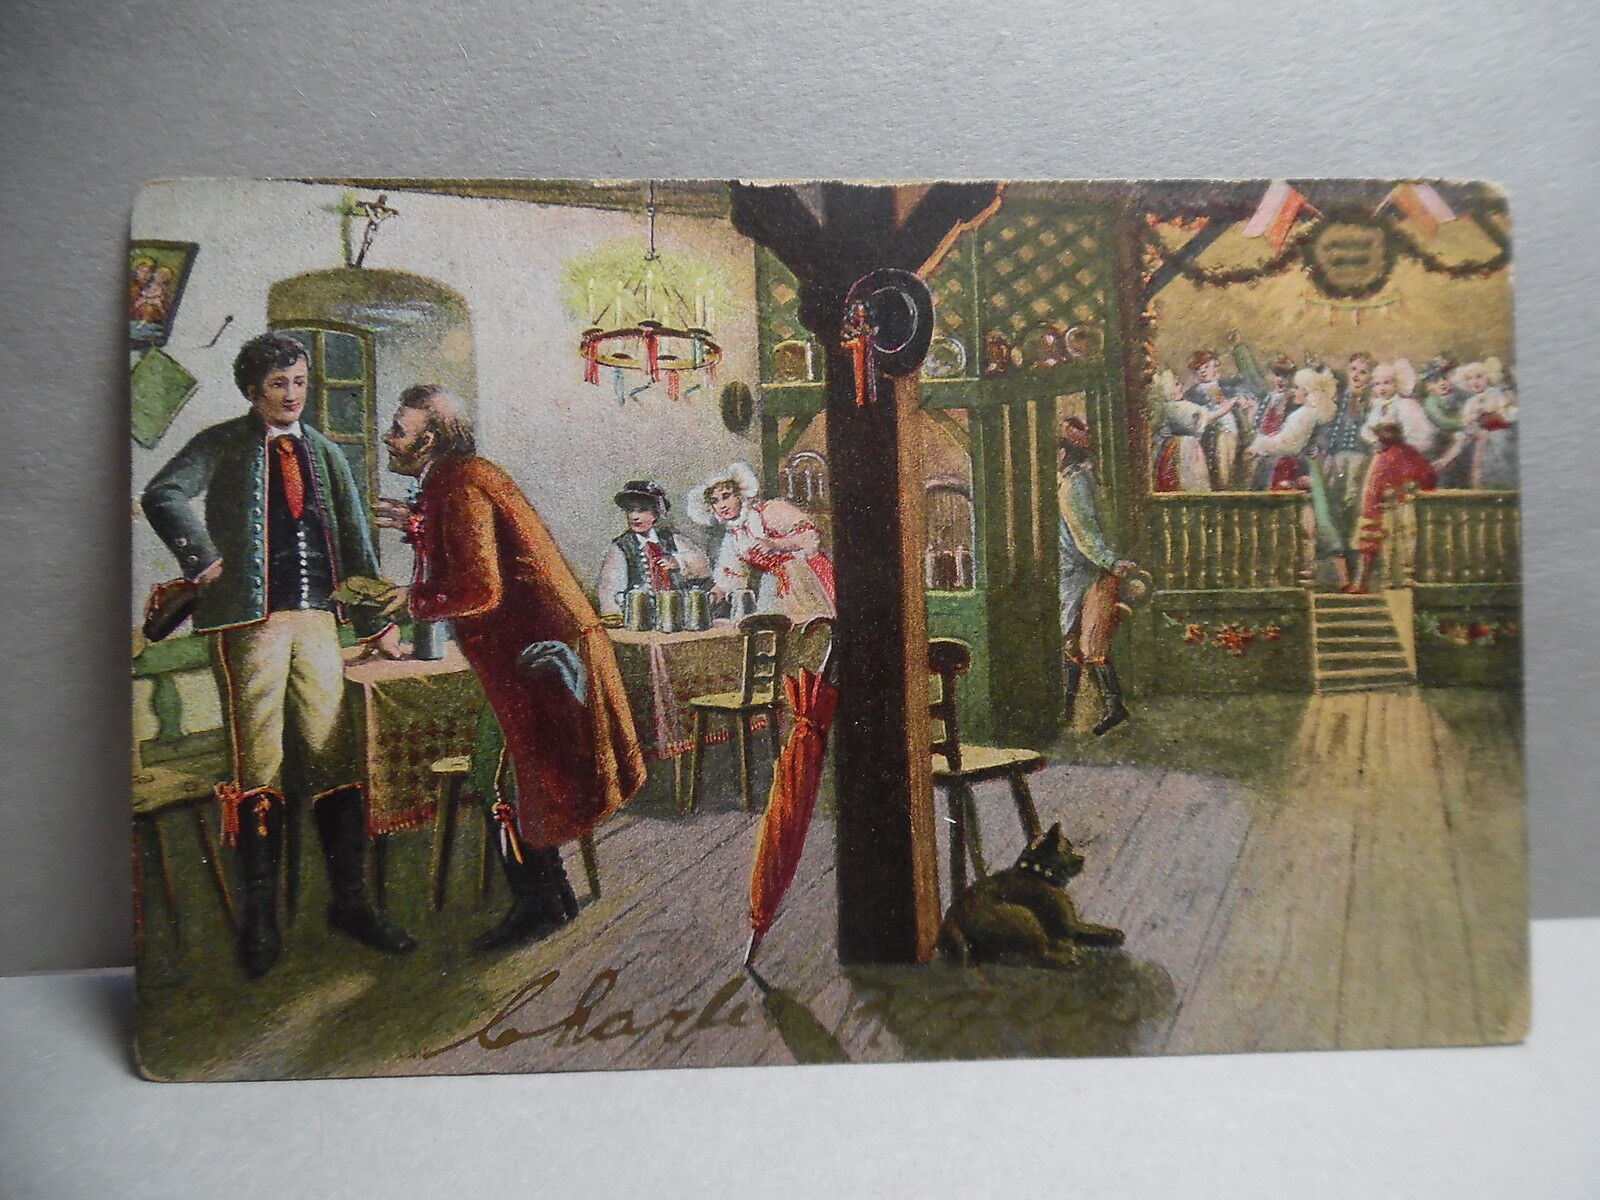 PC2088 - POSTCARD SHOWING OLD THYME TAVERN SCENE